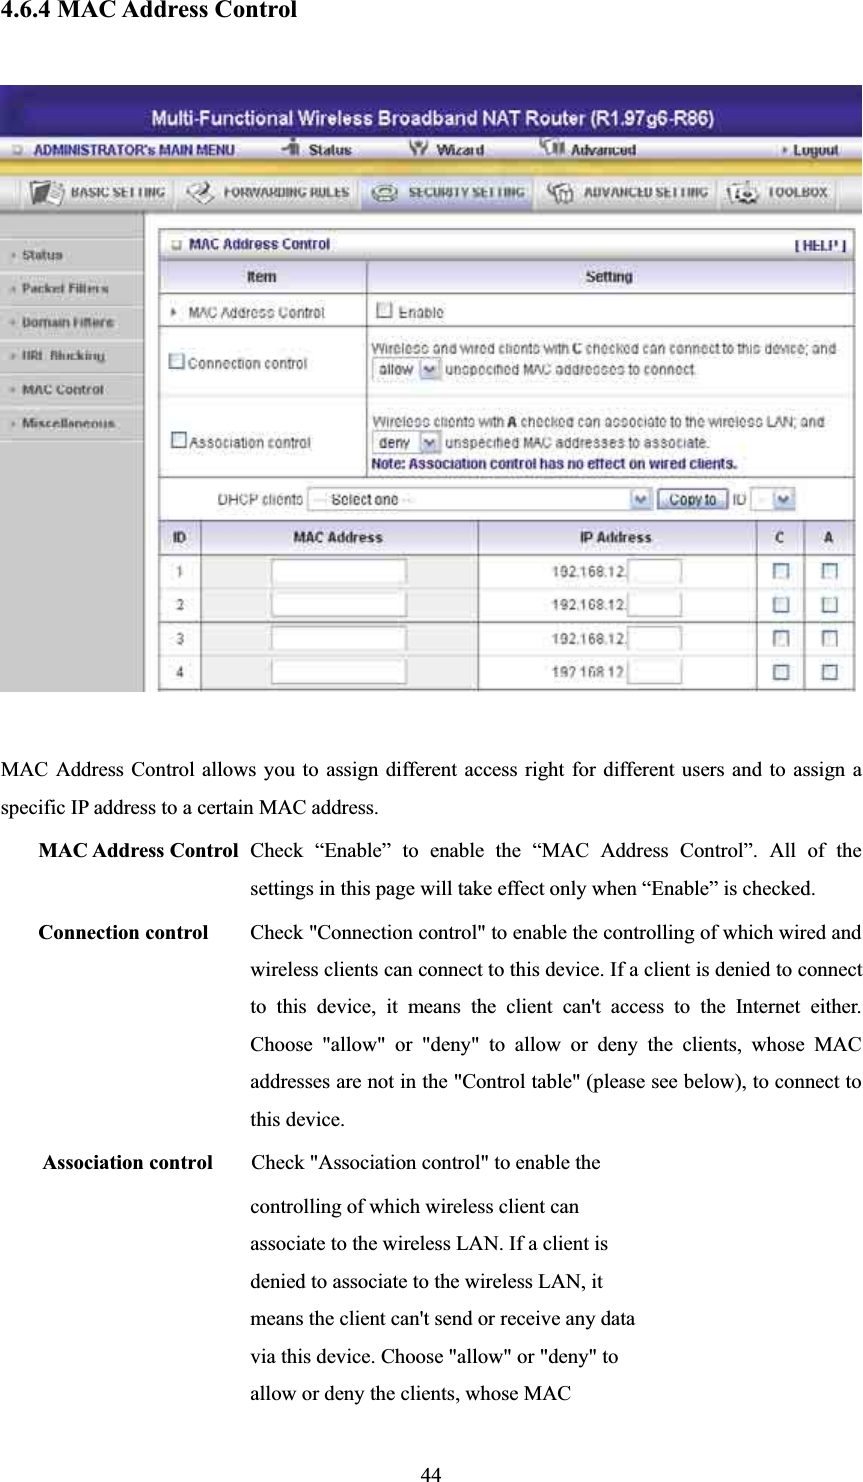 4.6.4 MAC Address Control MAC Address Control allows you to assign different access right for different users and to assign a specific IP address to a certain MAC address. MAC Address Control Check “Enable” to enable the “MAC Address Control”. All of the settings in this page will take effect only when “Enable” is checked. Connection control  Check &quot;Connection control&quot; to enable the controlling of which wired and wireless clients can connect to this device. If a client is denied to connect to this device, it means the client can&apos;t access to the Internet either. Choose &quot;allow&quot; or &quot;deny&quot; to allow or deny the clients, whose MAC addresses are not in the &quot;Control table&quot; (please see below), to connect to this device. Association control  Check &quot;Association control&quot; to enable the controlling of which wireless client can associate to the wireless LAN. If a client is denied to associate to the wireless LAN, it means the client can&apos;t send or receive any data via this device. Choose &quot;allow&quot; or &quot;deny&quot; to allow or deny the clients, whose MAC 44